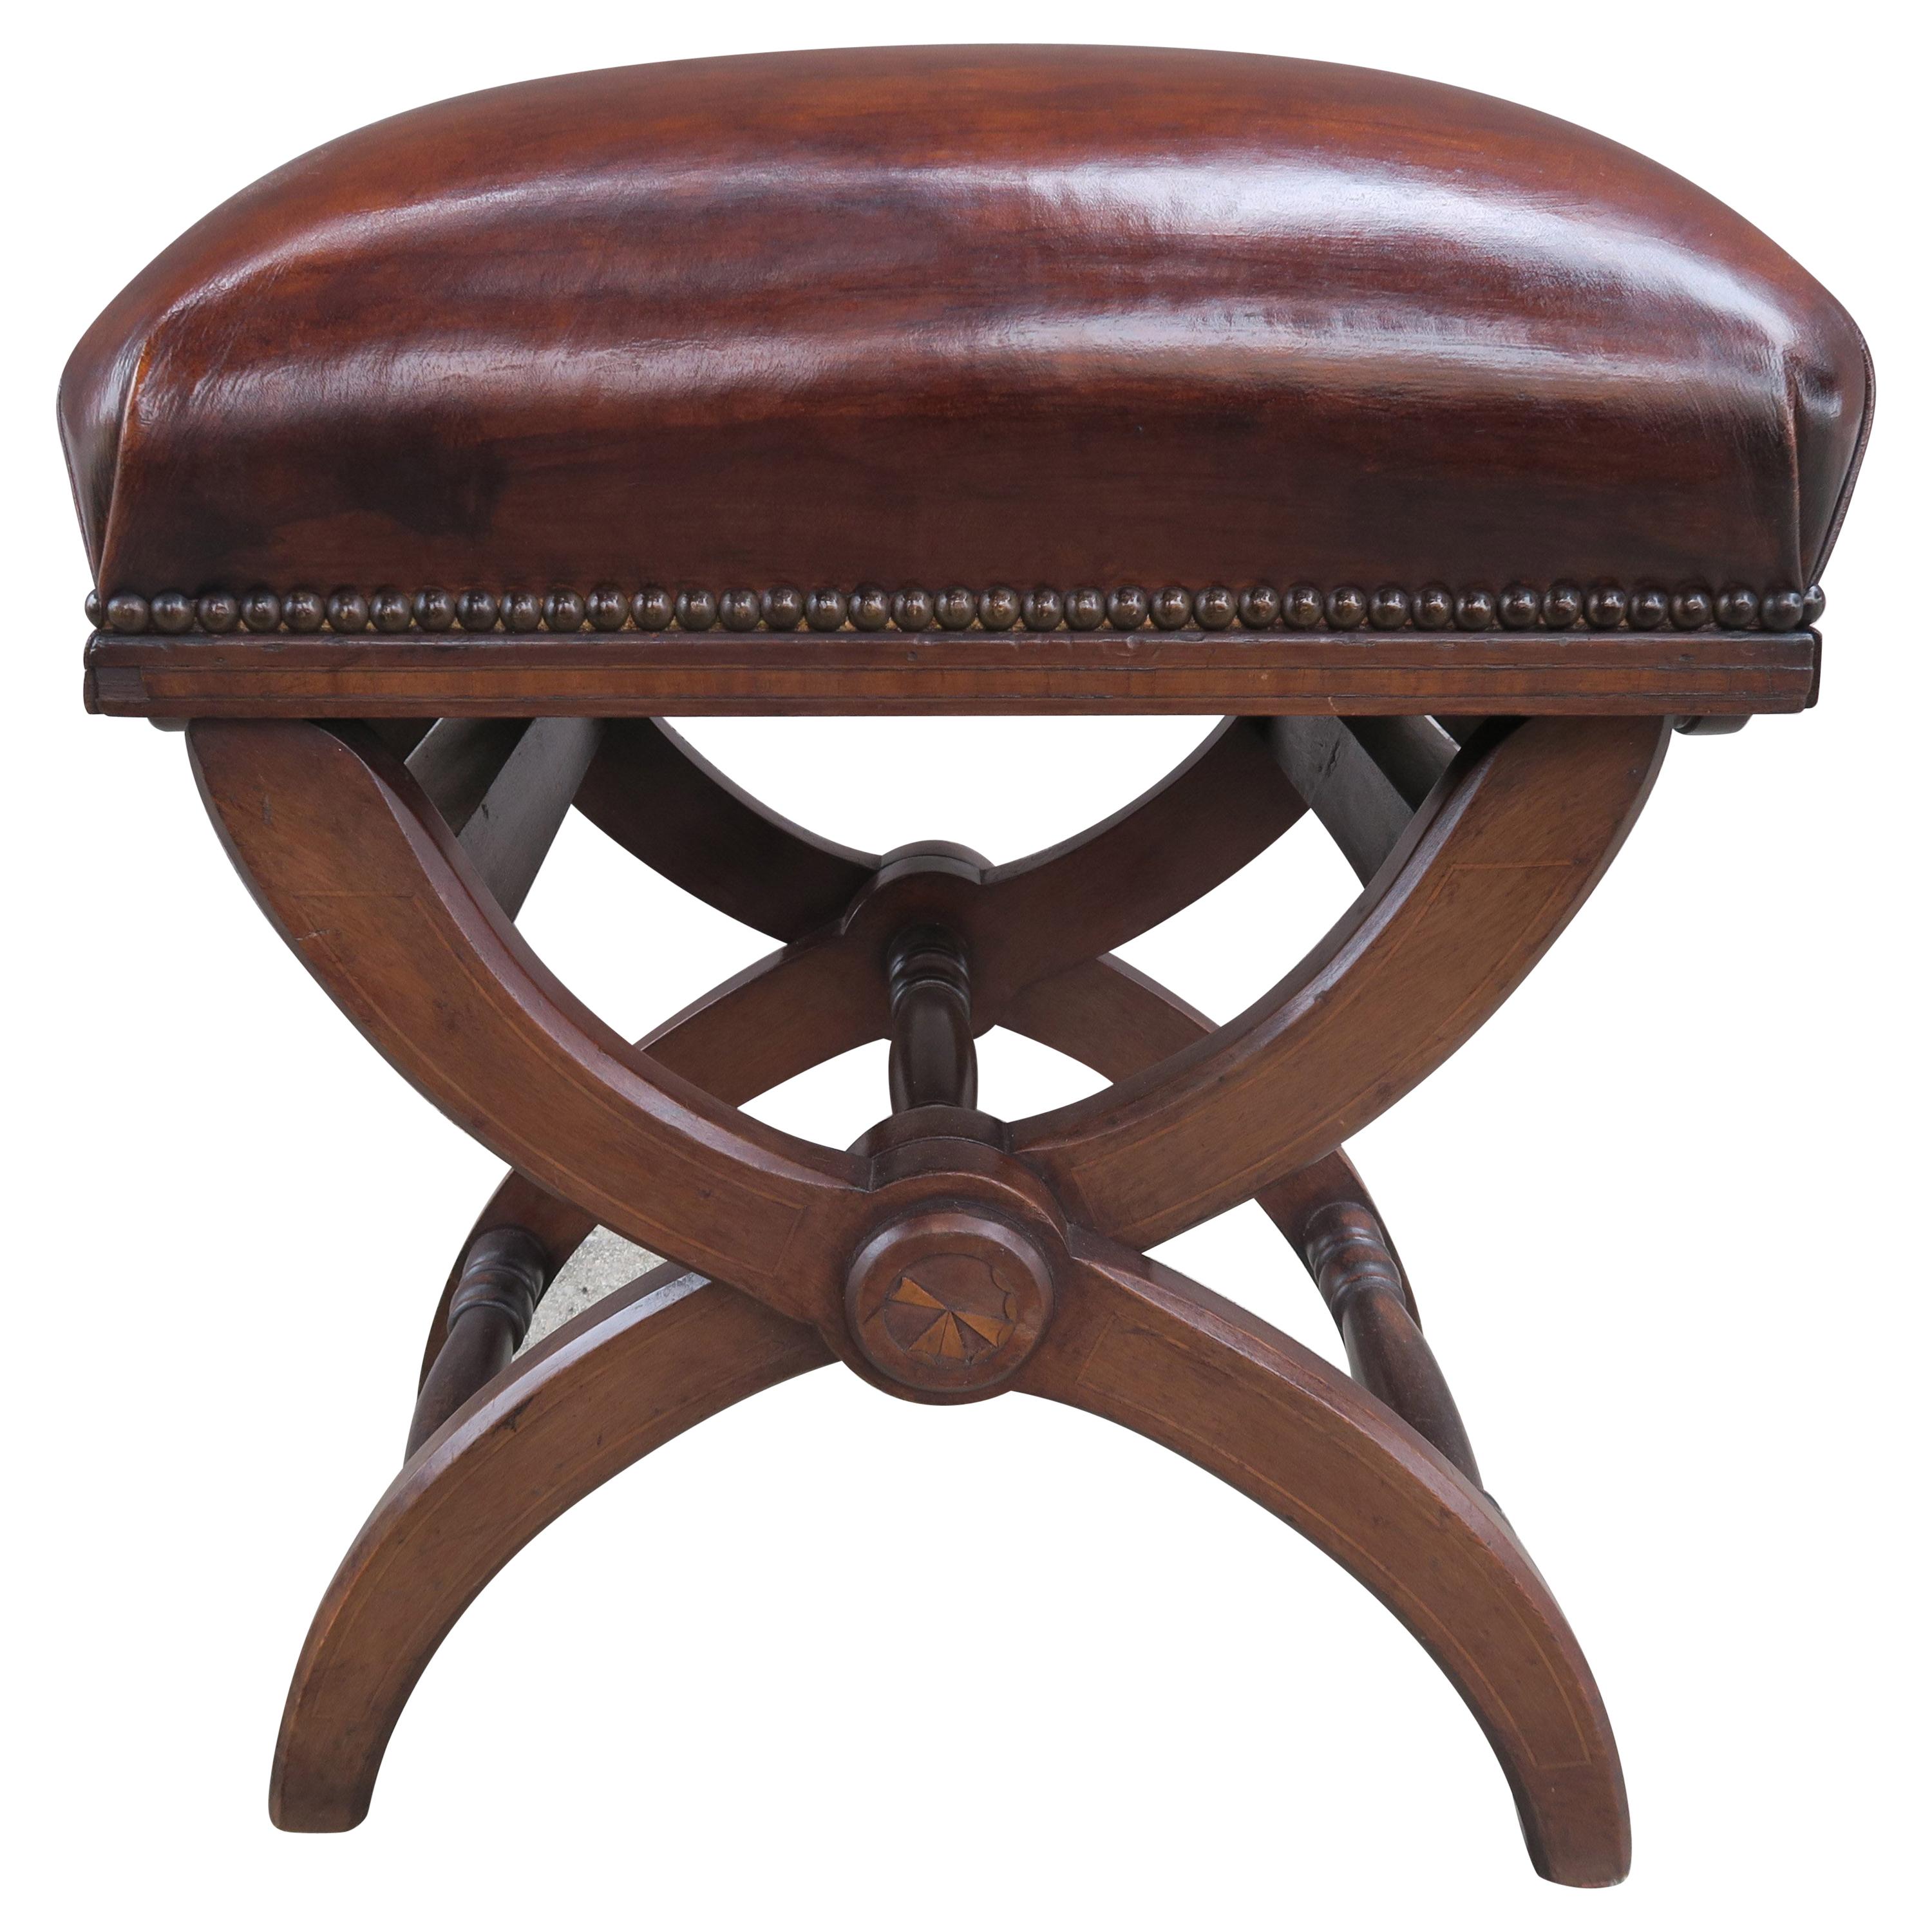 English "x" Shaped Leather Bench with Adjustable Knobs